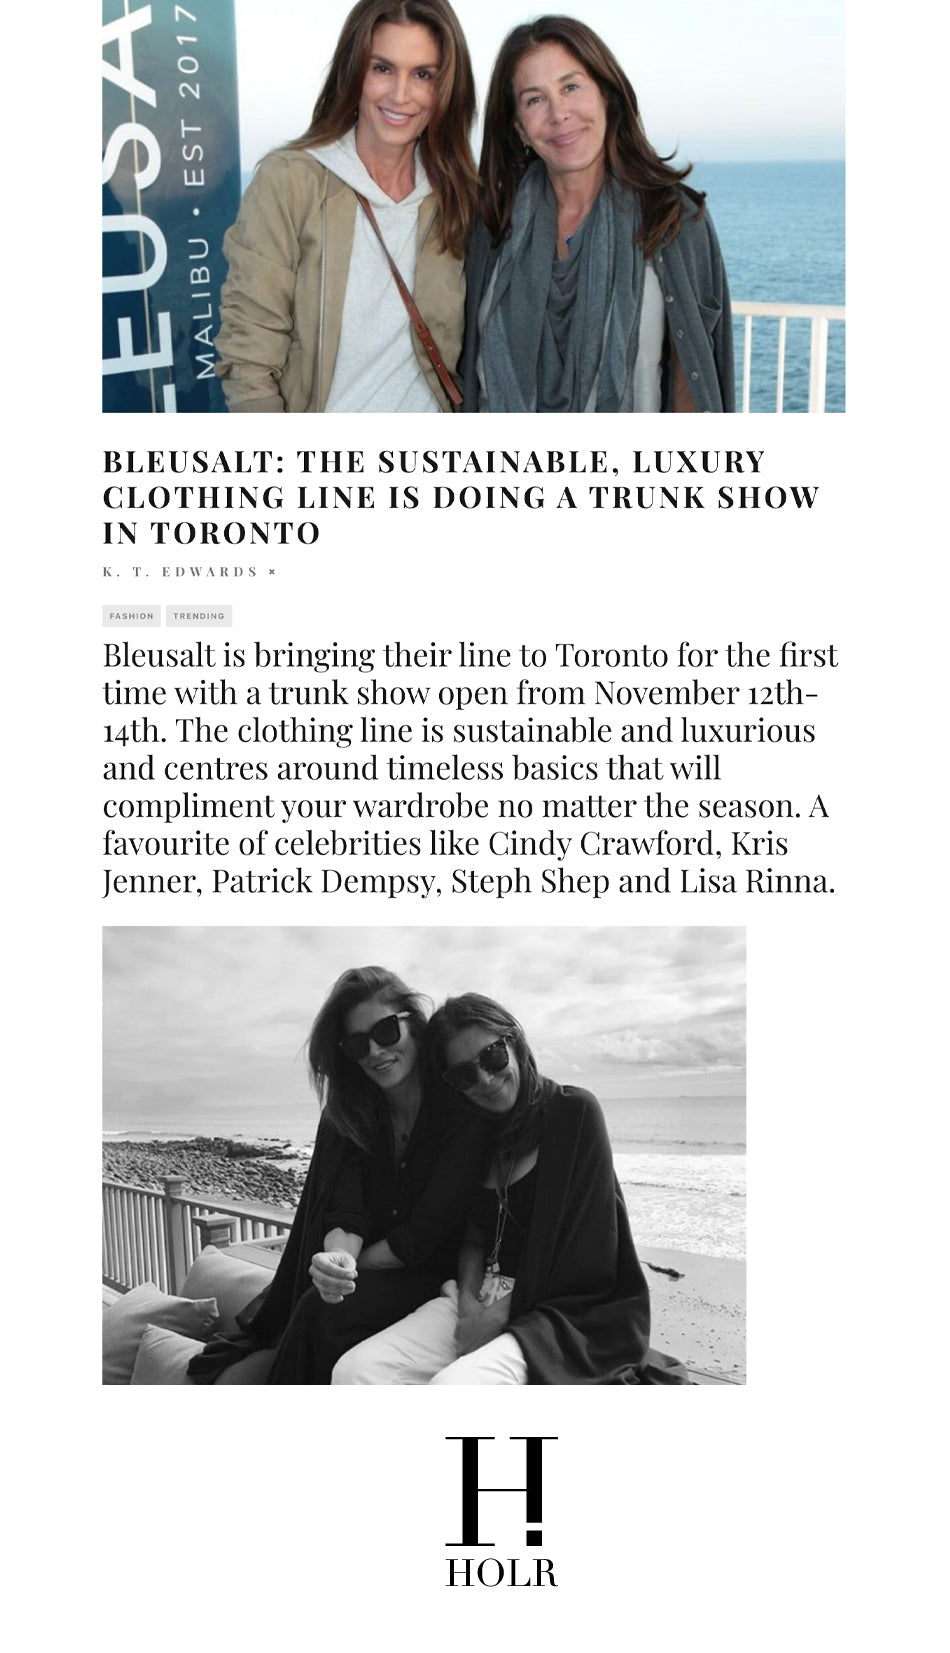 BLEUSALT: THE SUSTAINABLE, LUXURY CLOTHING LINE IS DOING A TRUNK SHOW IN TORONTO-Bleusalt